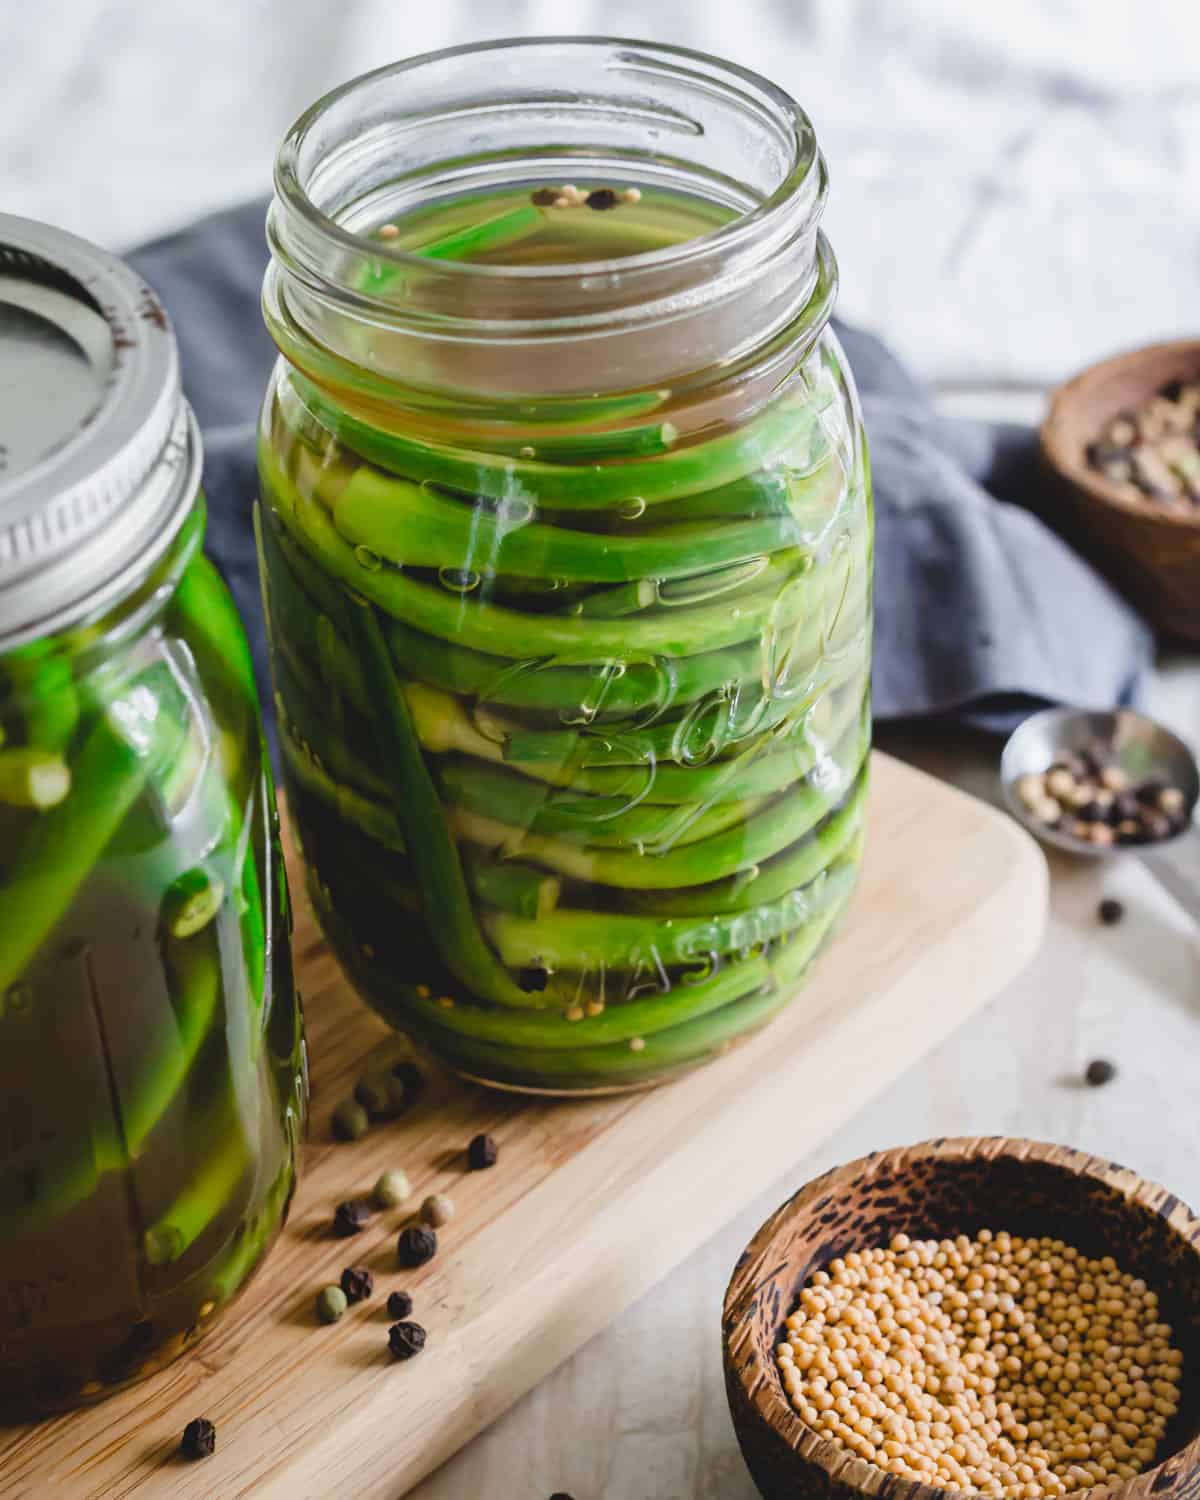 Quick and easy recipe to make pickled garlic scapes in mason jars.